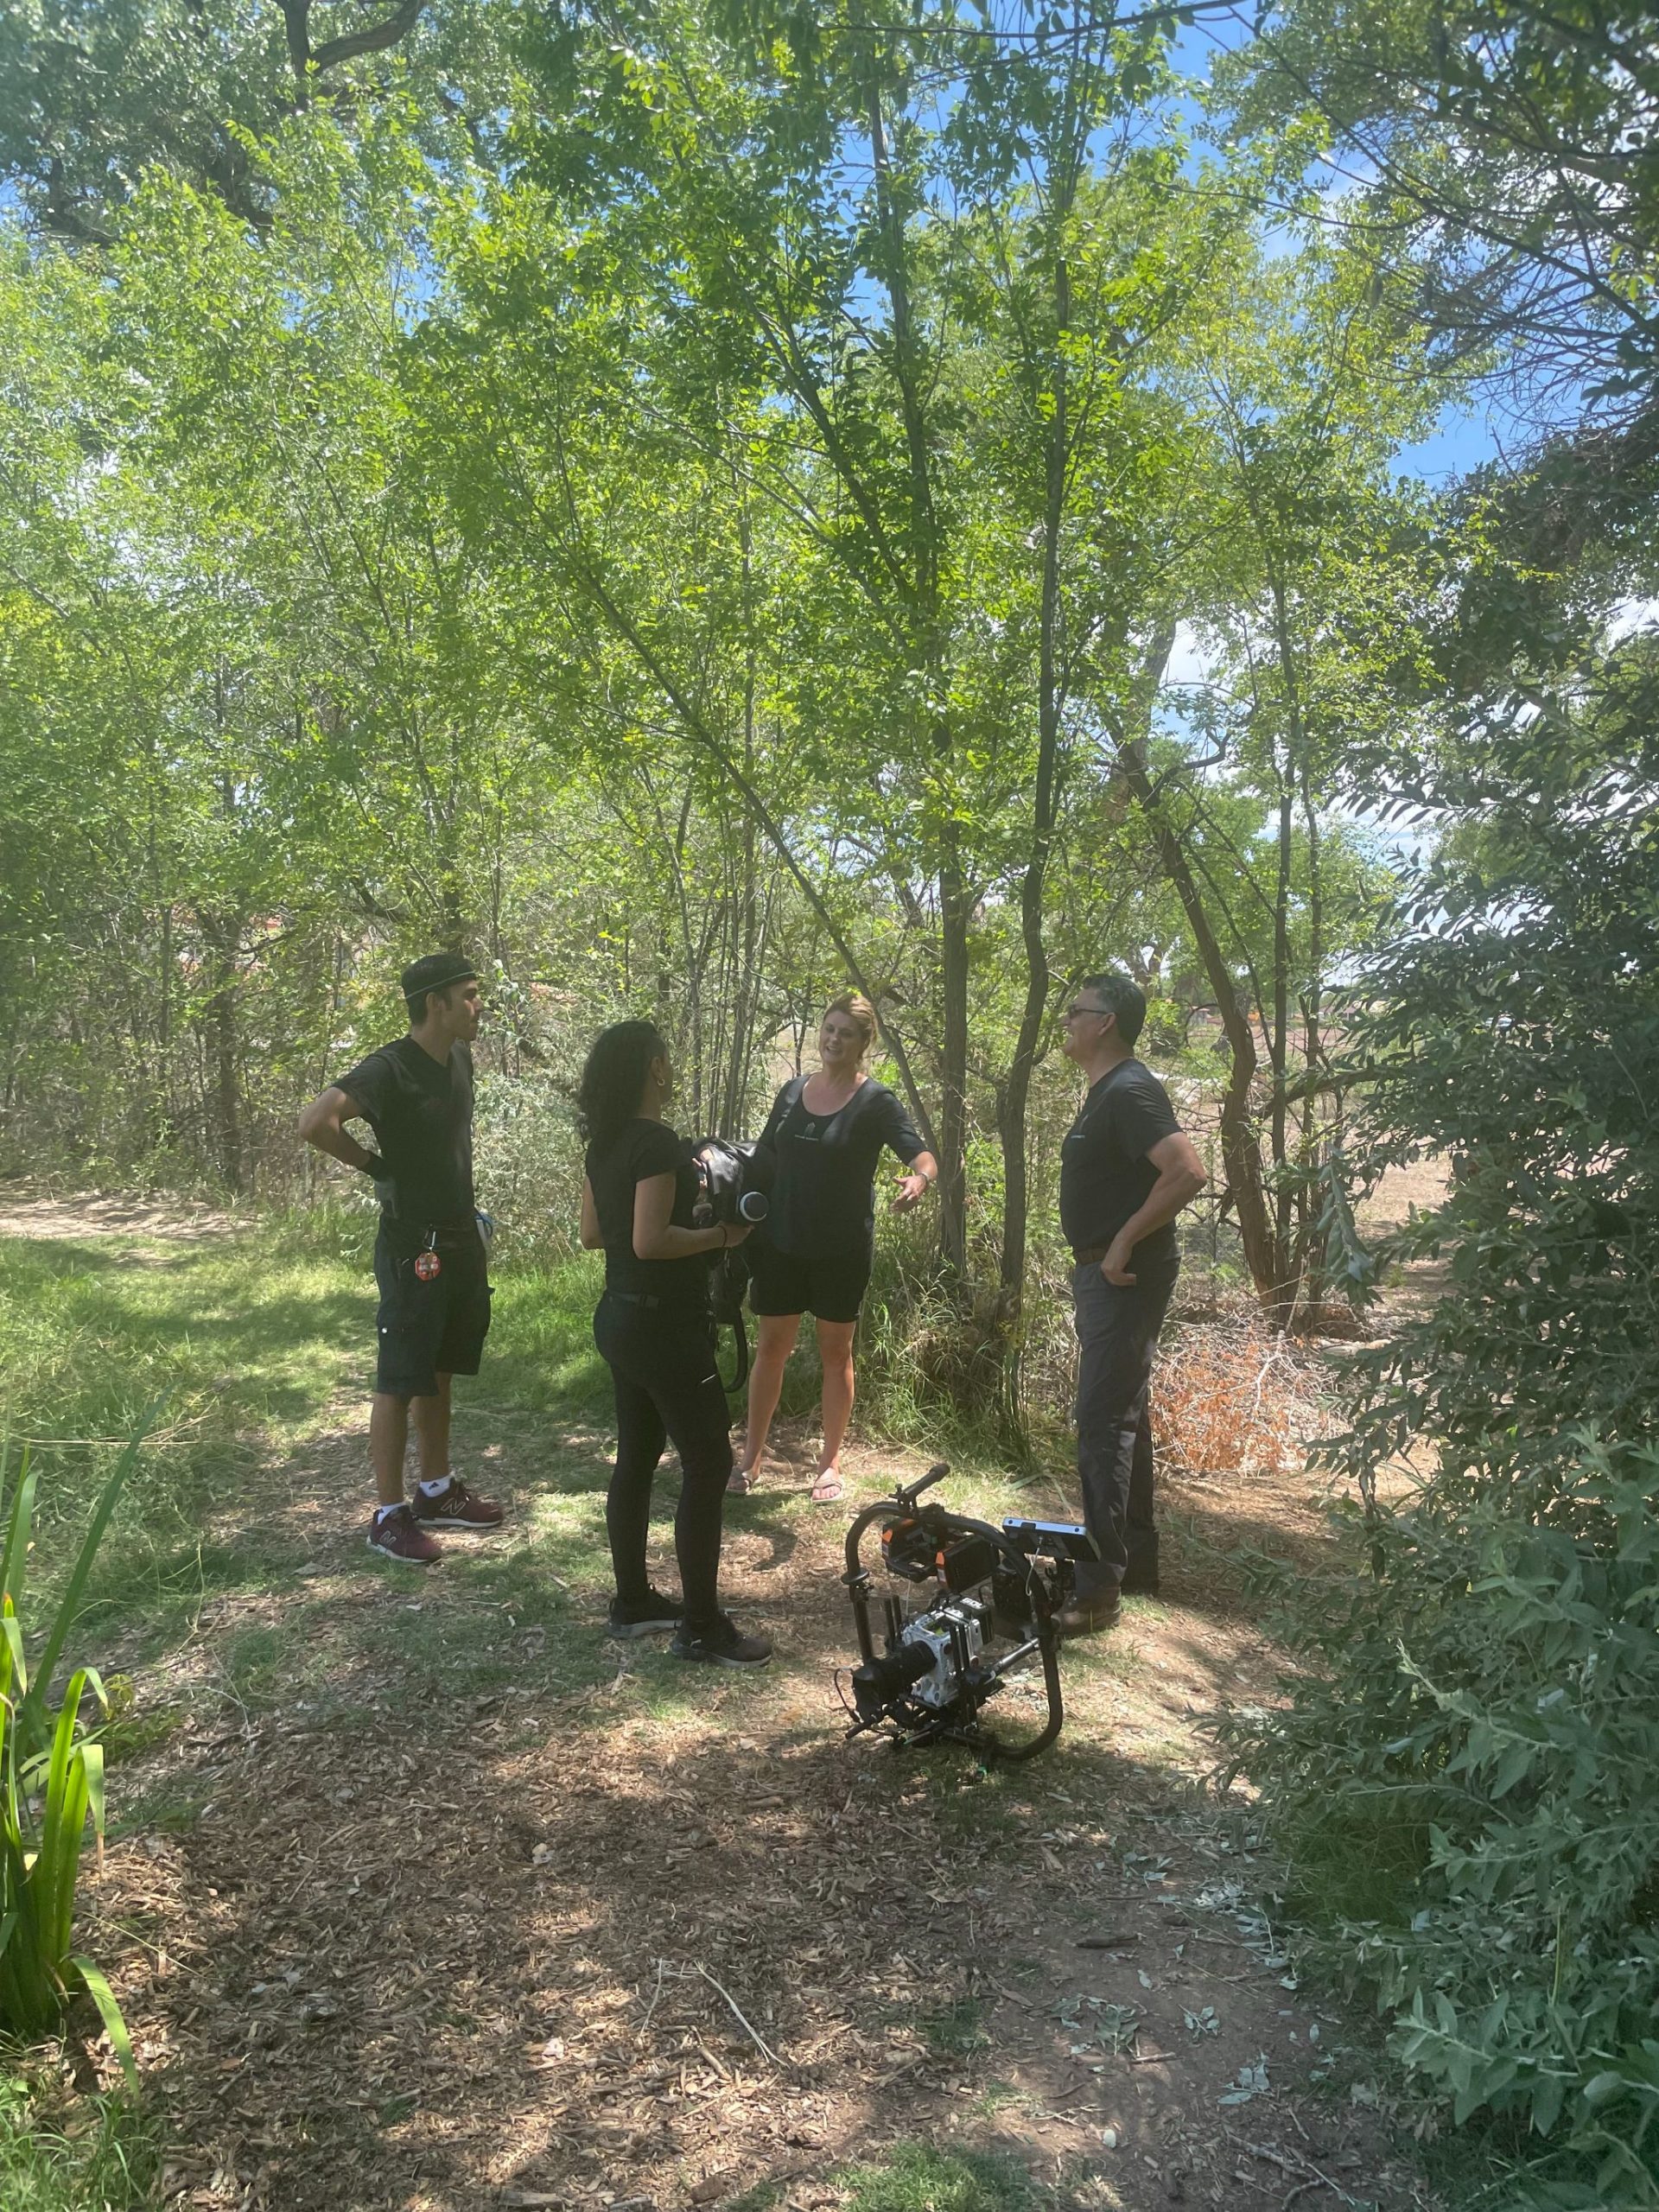 IU C&I Studios Portfolio Two men and two women talking in a forest with video equipment on the ground nearby